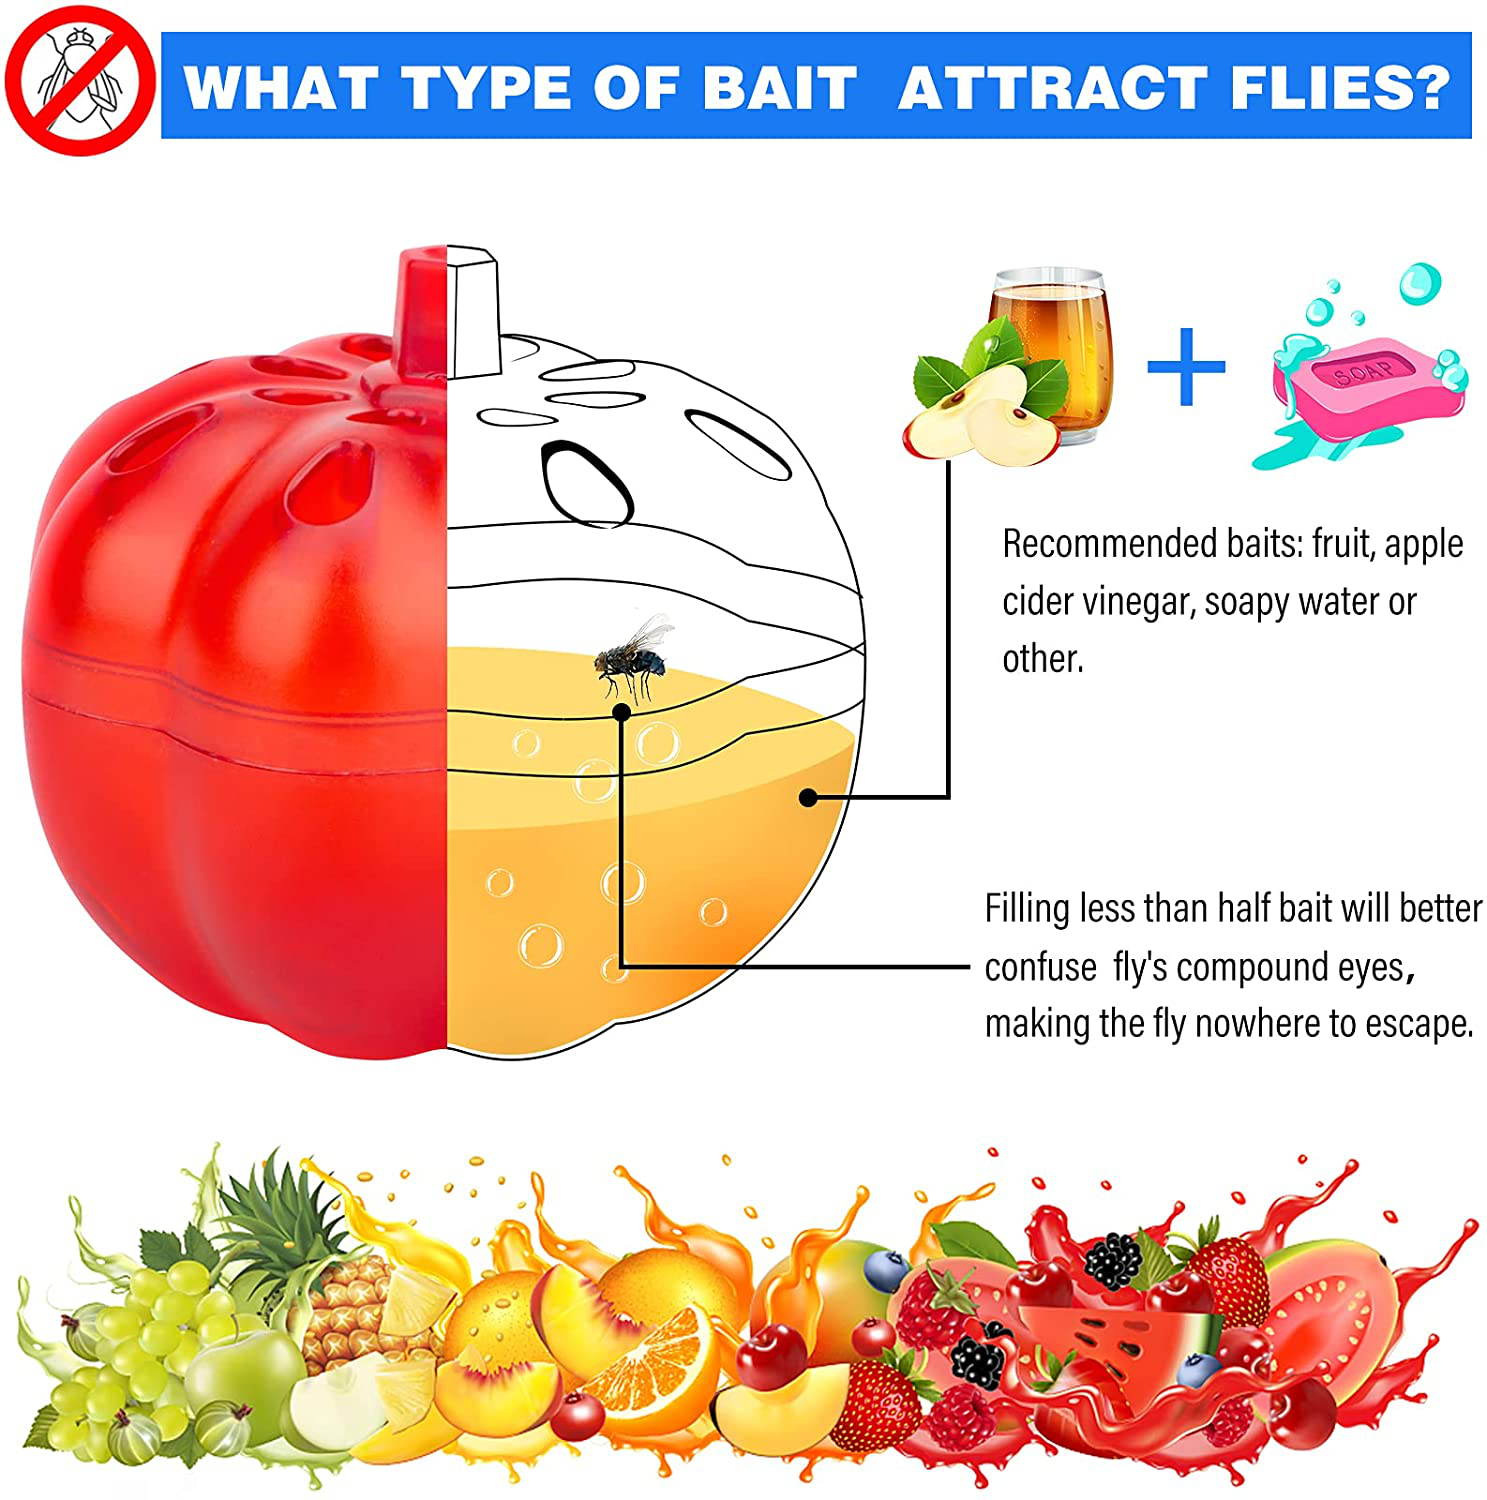 Burxoe Fruit Fly Trap,Reusable Fruit Fly Traps for Kitchen, Fruit Fly Traps Indoor Sticky, Fly Trap Refill,Fly Catcher for Food Areas Safe Non-Toxic Odorless 2 Packs Pumpkin Shape